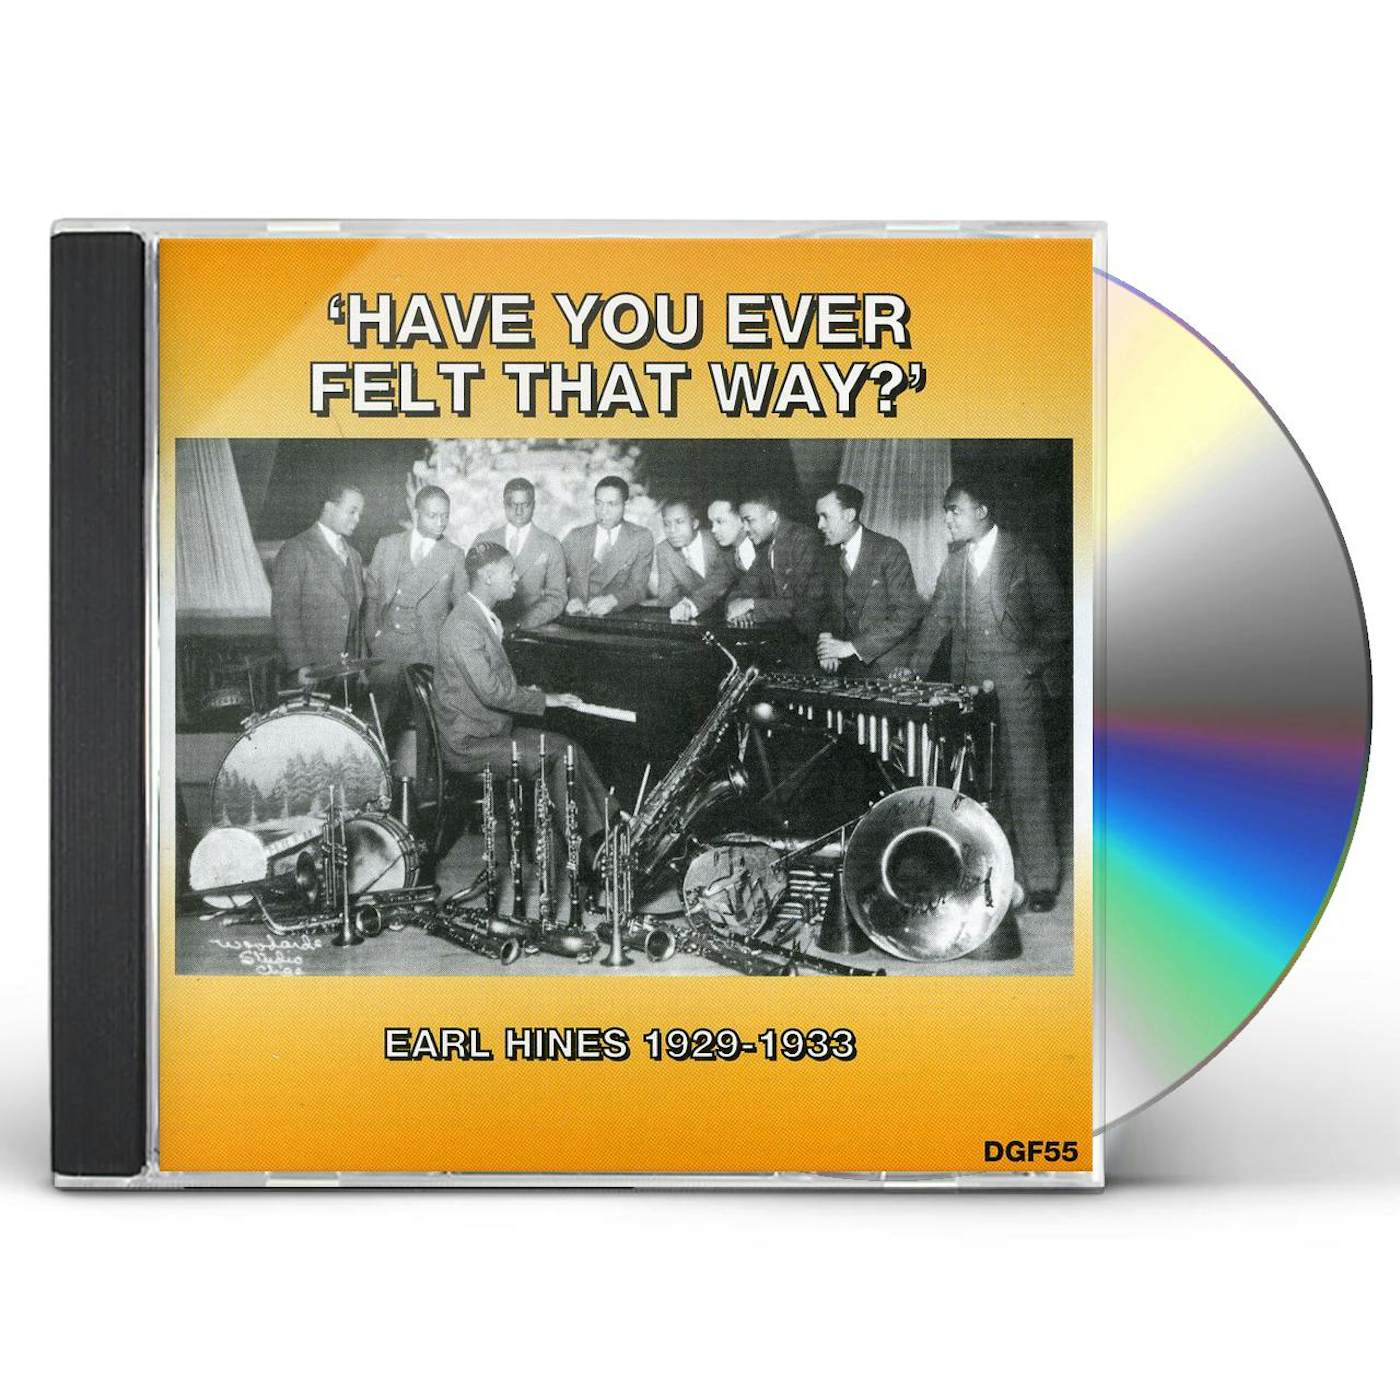 Earl Hines HAVE YOU EVER FELT THAT WAY 1929-1933 CD